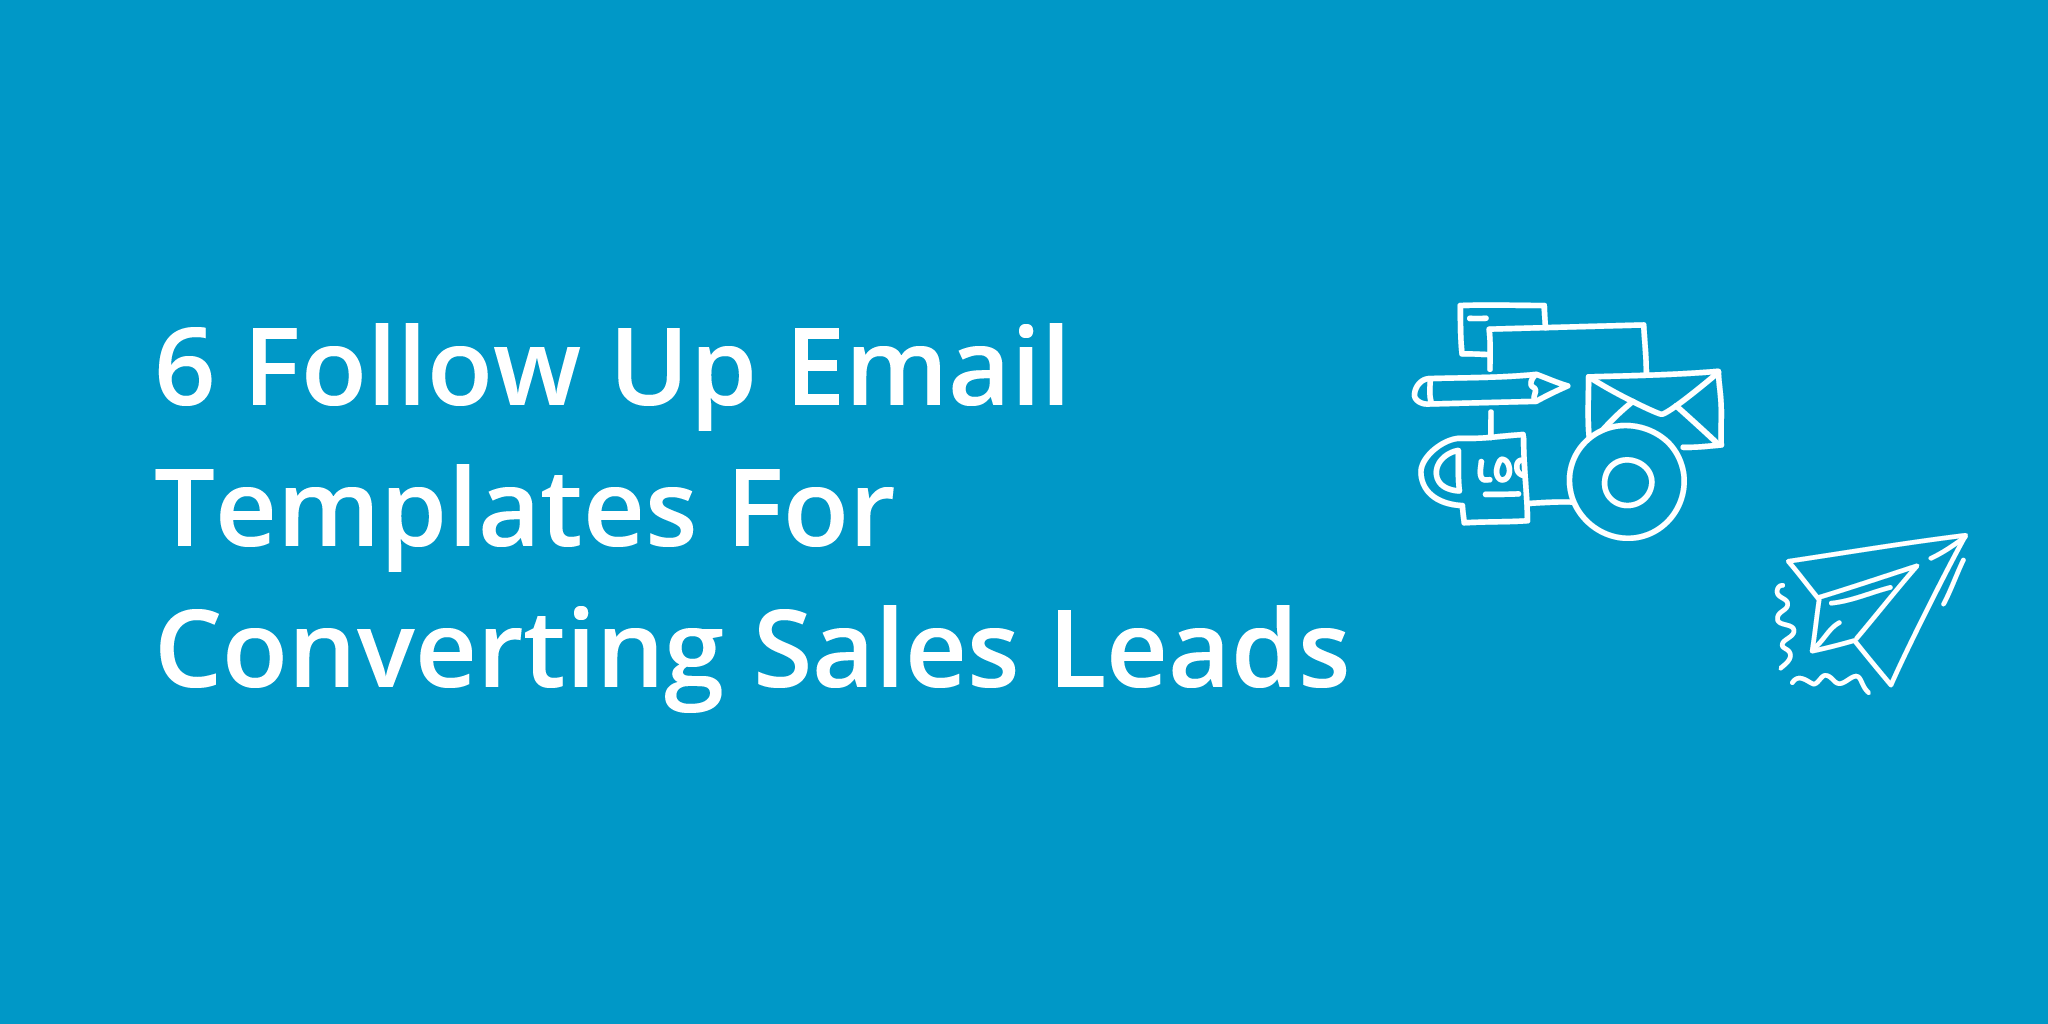 6-follow-up-email-templates-for-converting-sales-leads